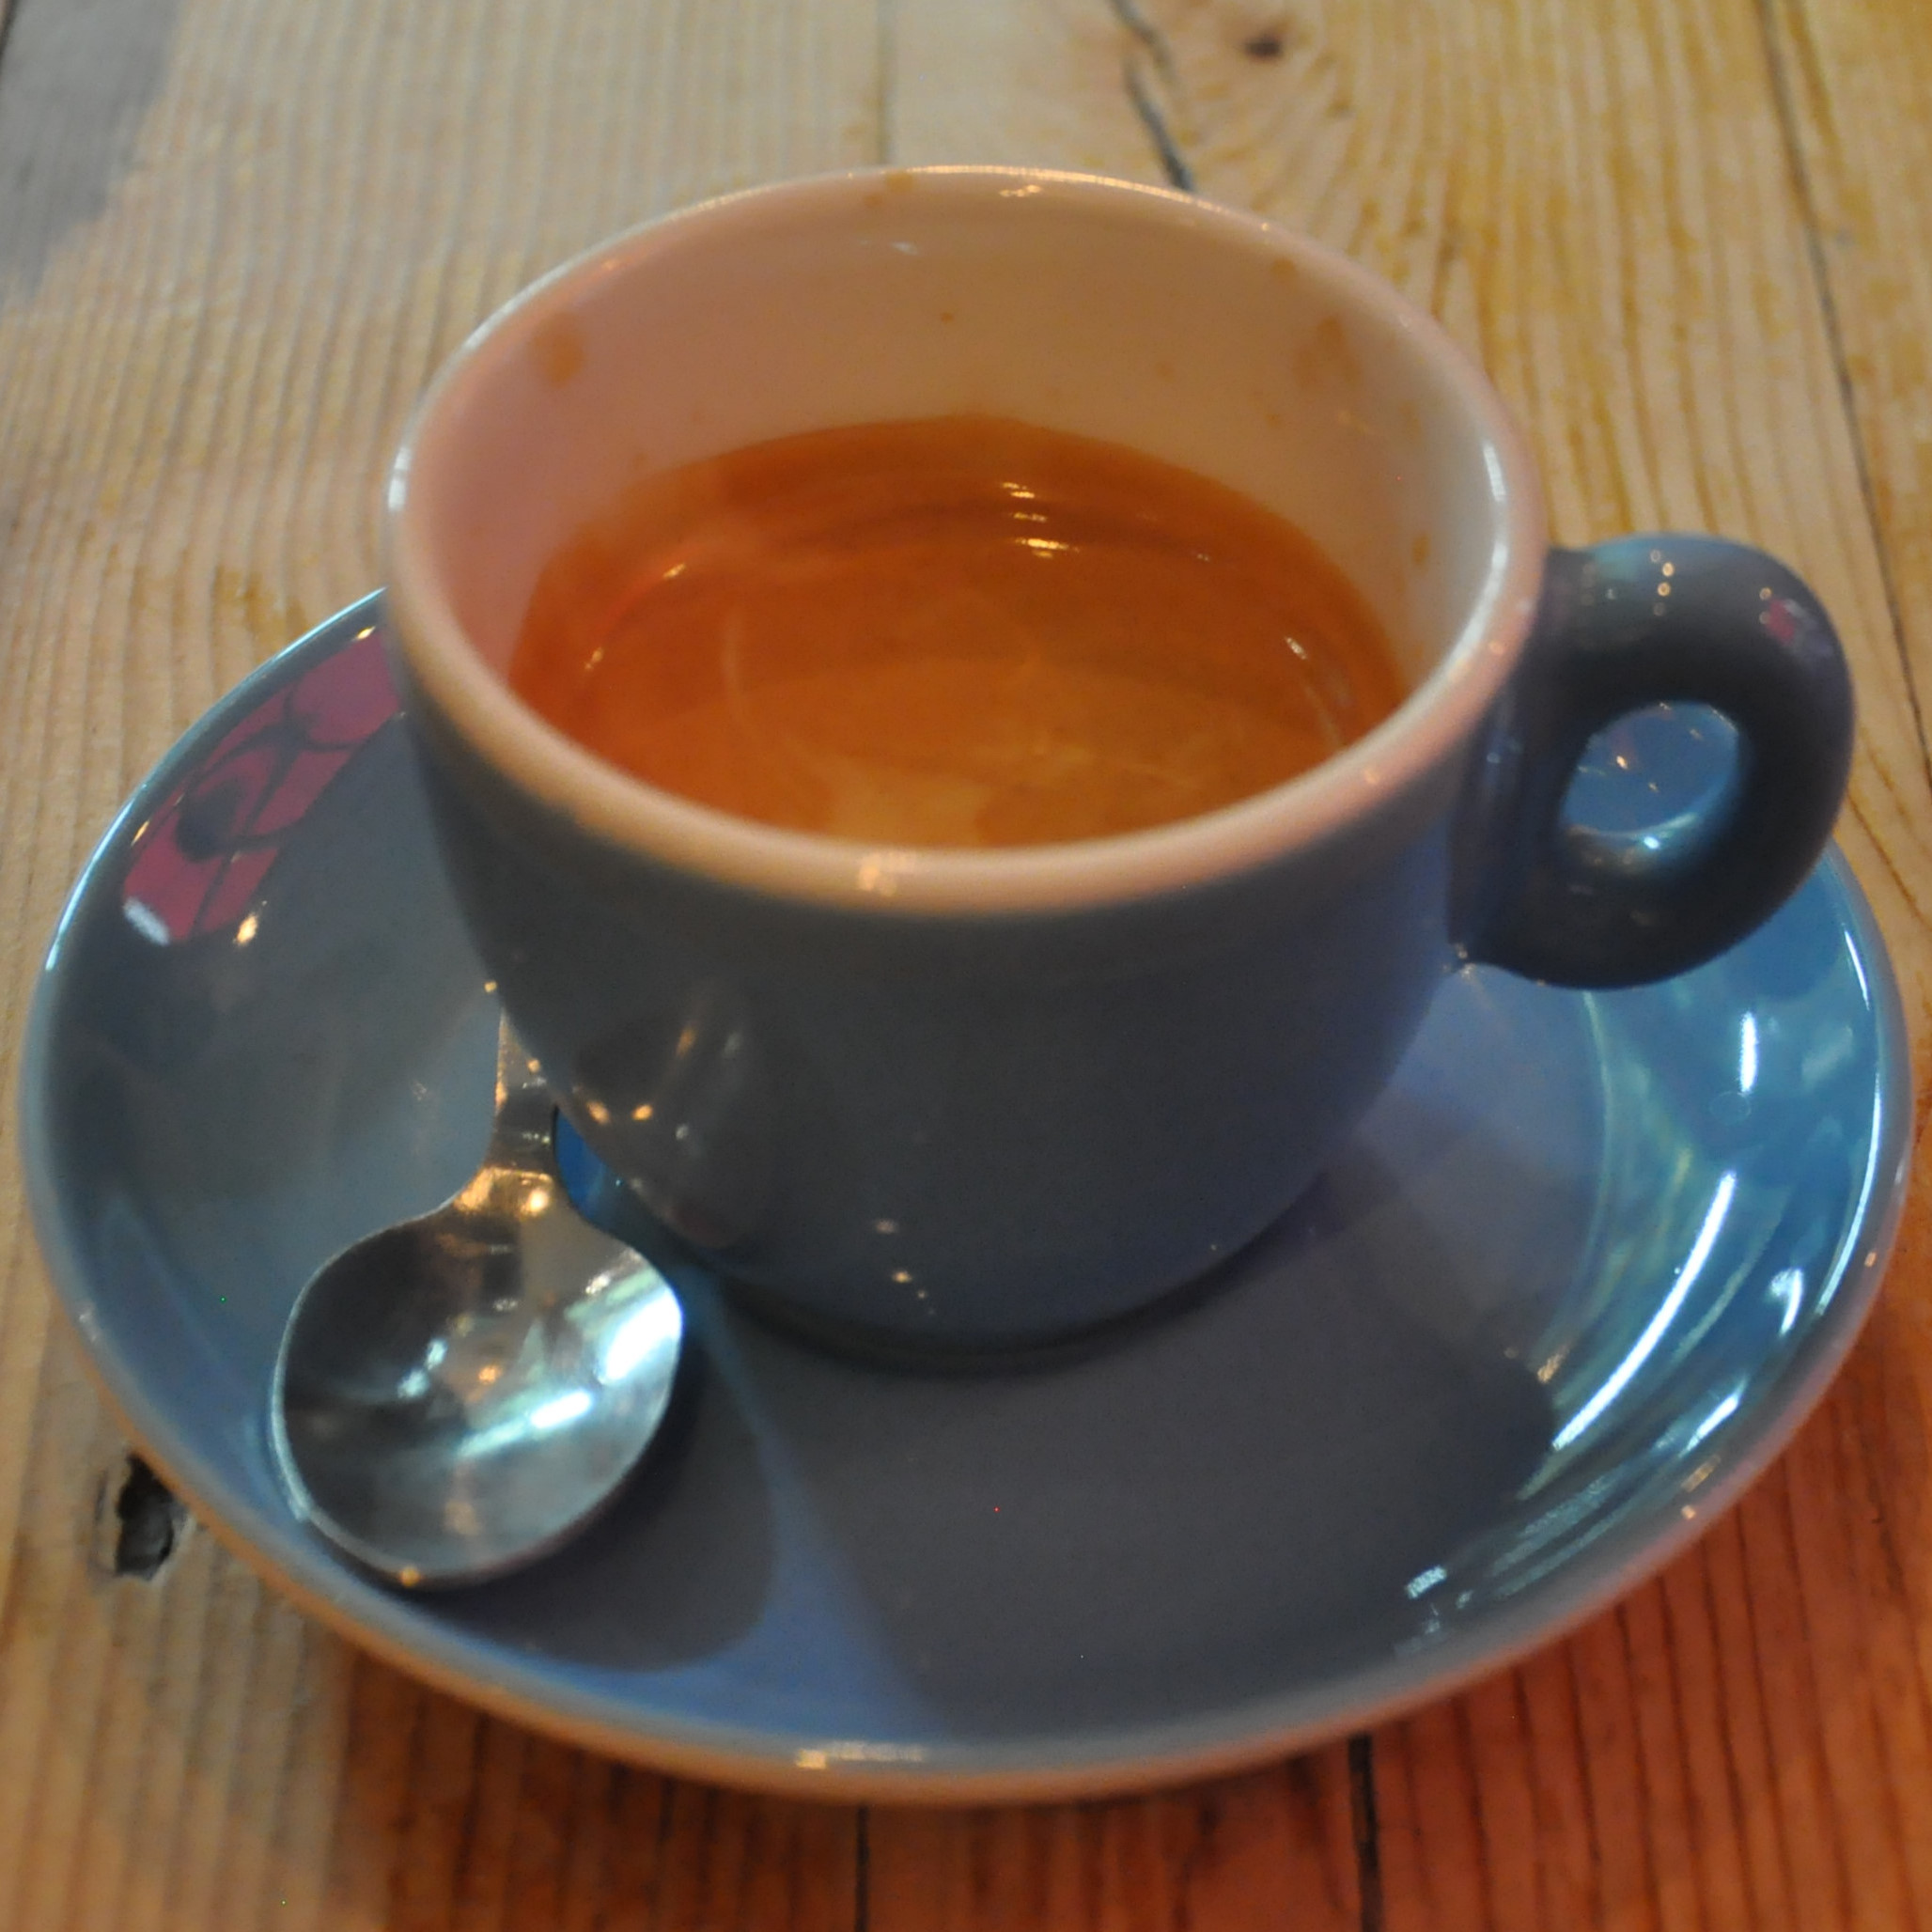 A shot of the eponymous espresso blend from Terrone & Co, served at La Gelatiera on New Row in London.